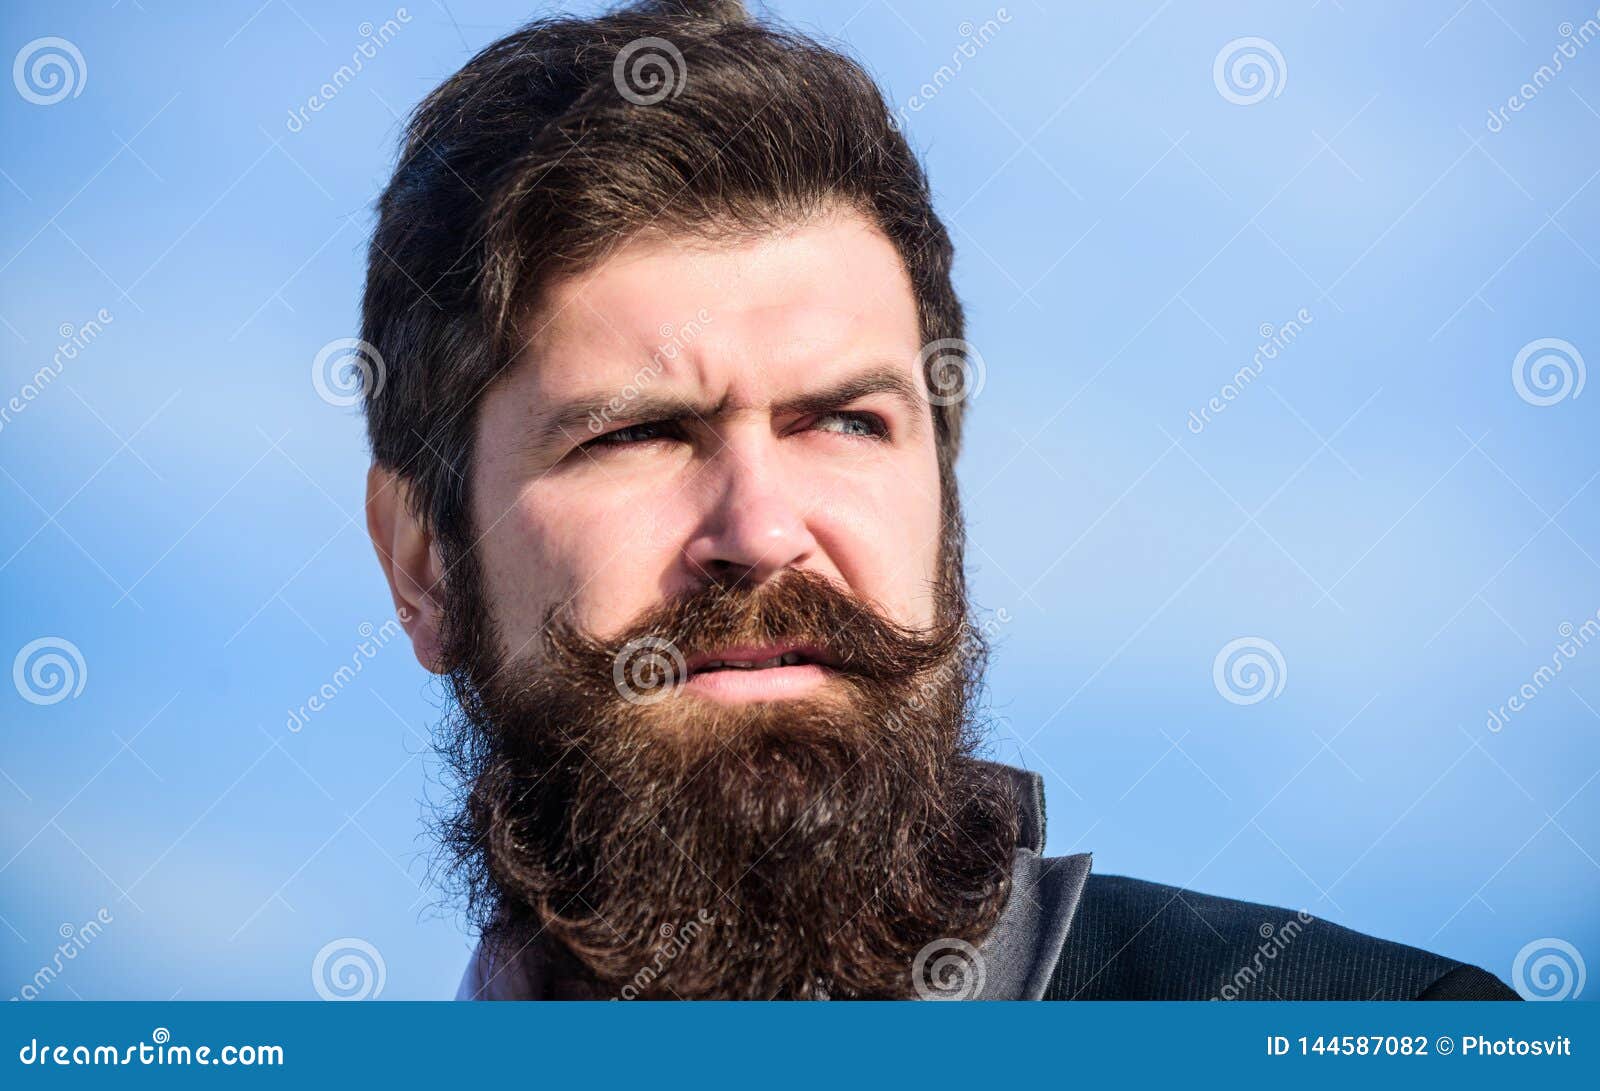 Every Beard Completely Unique. Invest in Stylish Appearance. Grow Thick  Beard Fast Stock Photo - Image of background, masculinity: 144587082